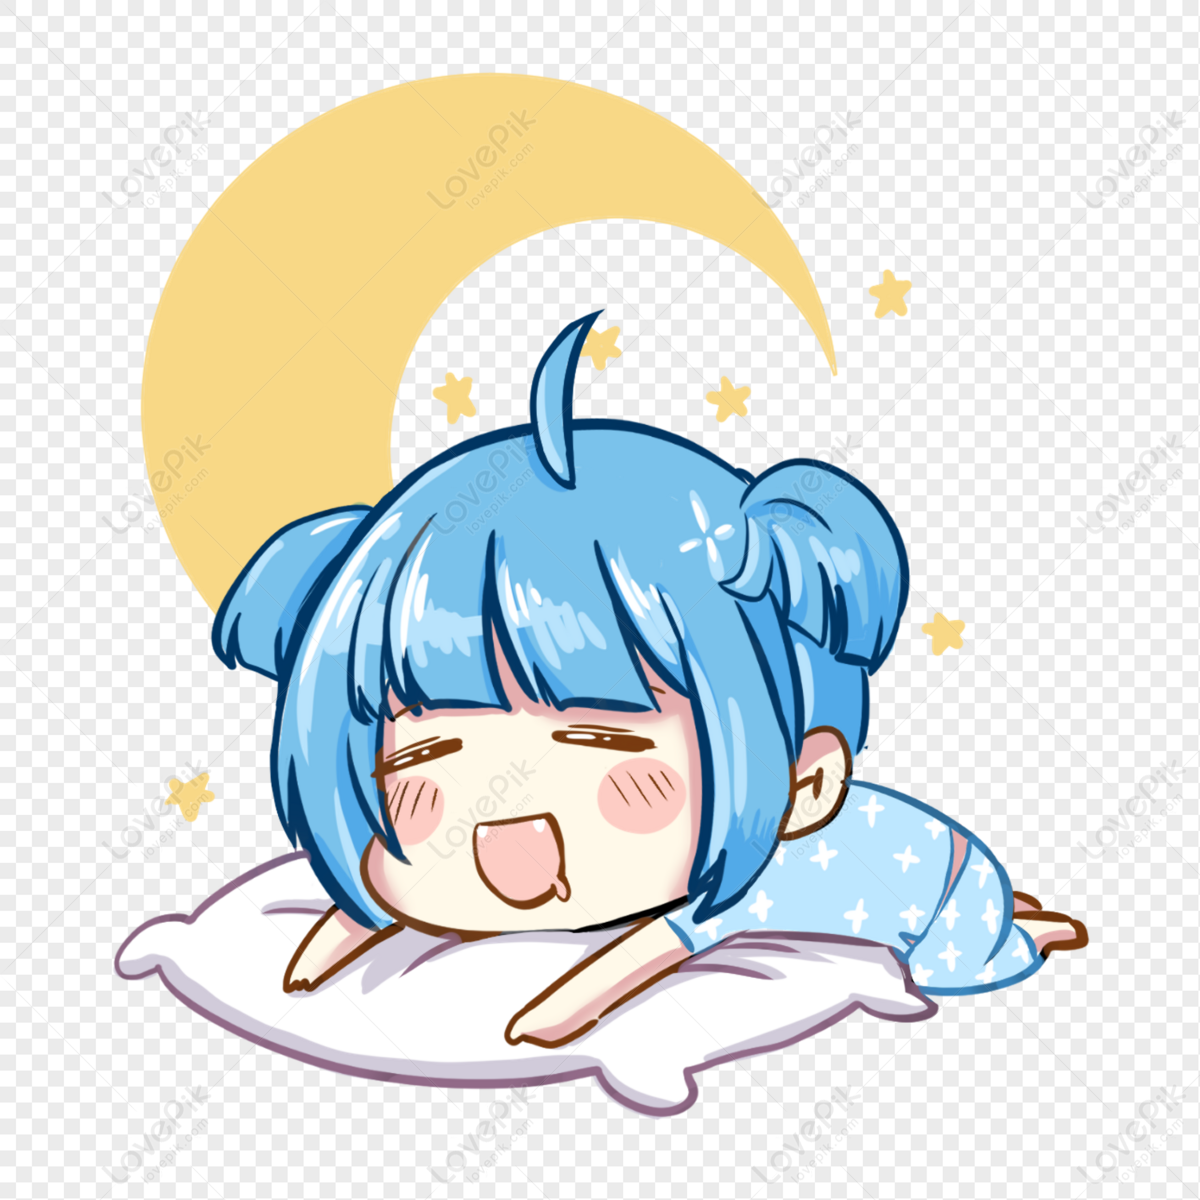 Creative Hand Painted Cute Girl Blue Sleeping Good Night Dream E PNG Image  Free Download And Clipart Image For Free Download - Lovepik | 401249331